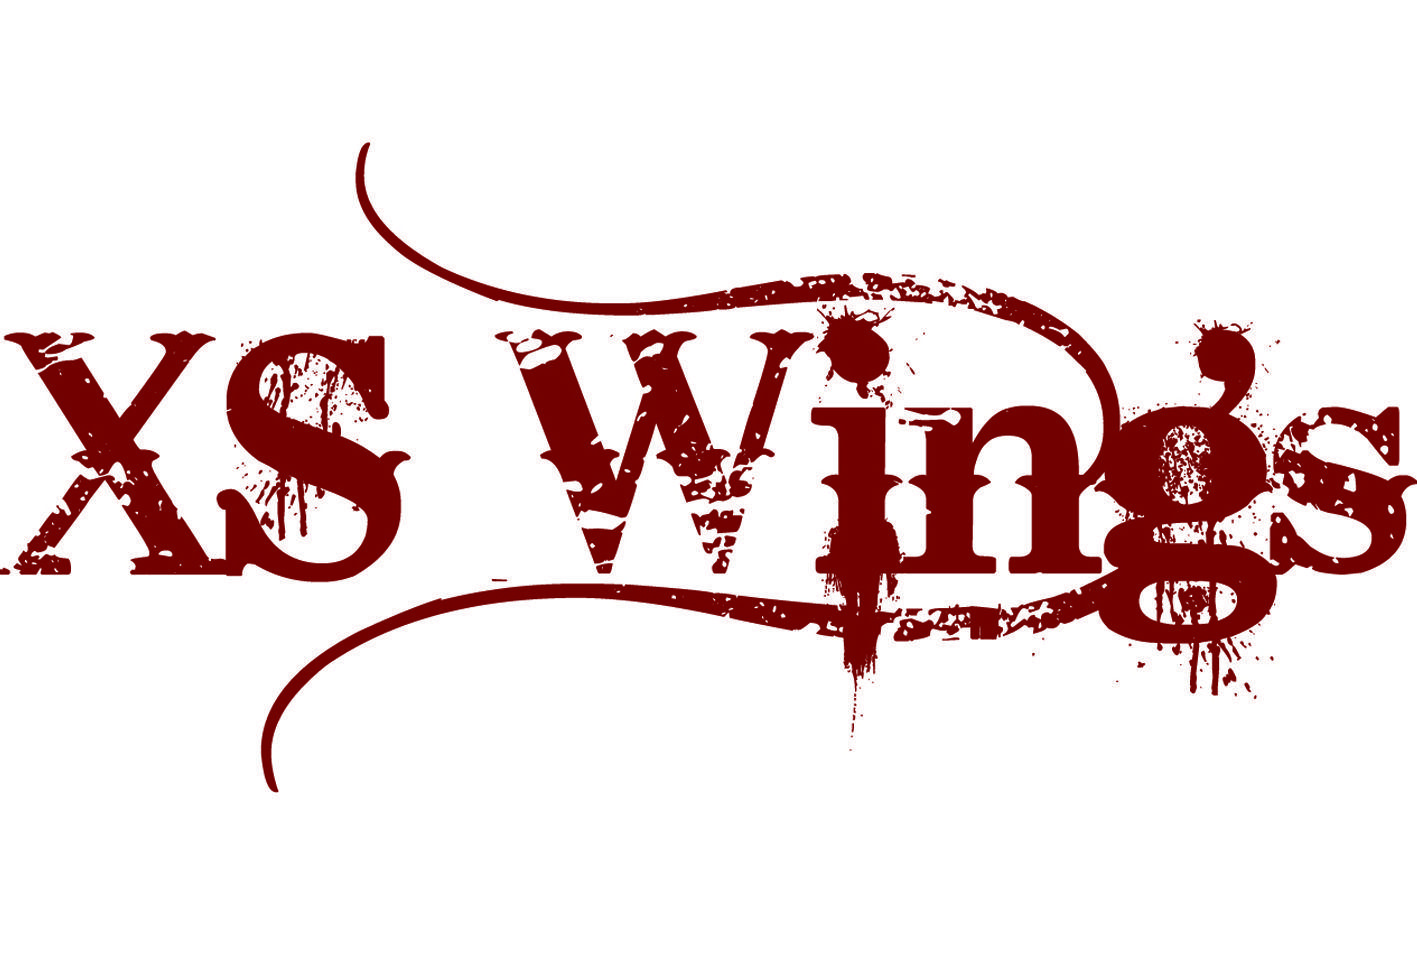 XS Logo - Xs Wings Archery vanes – You shoot the stories. We just help.